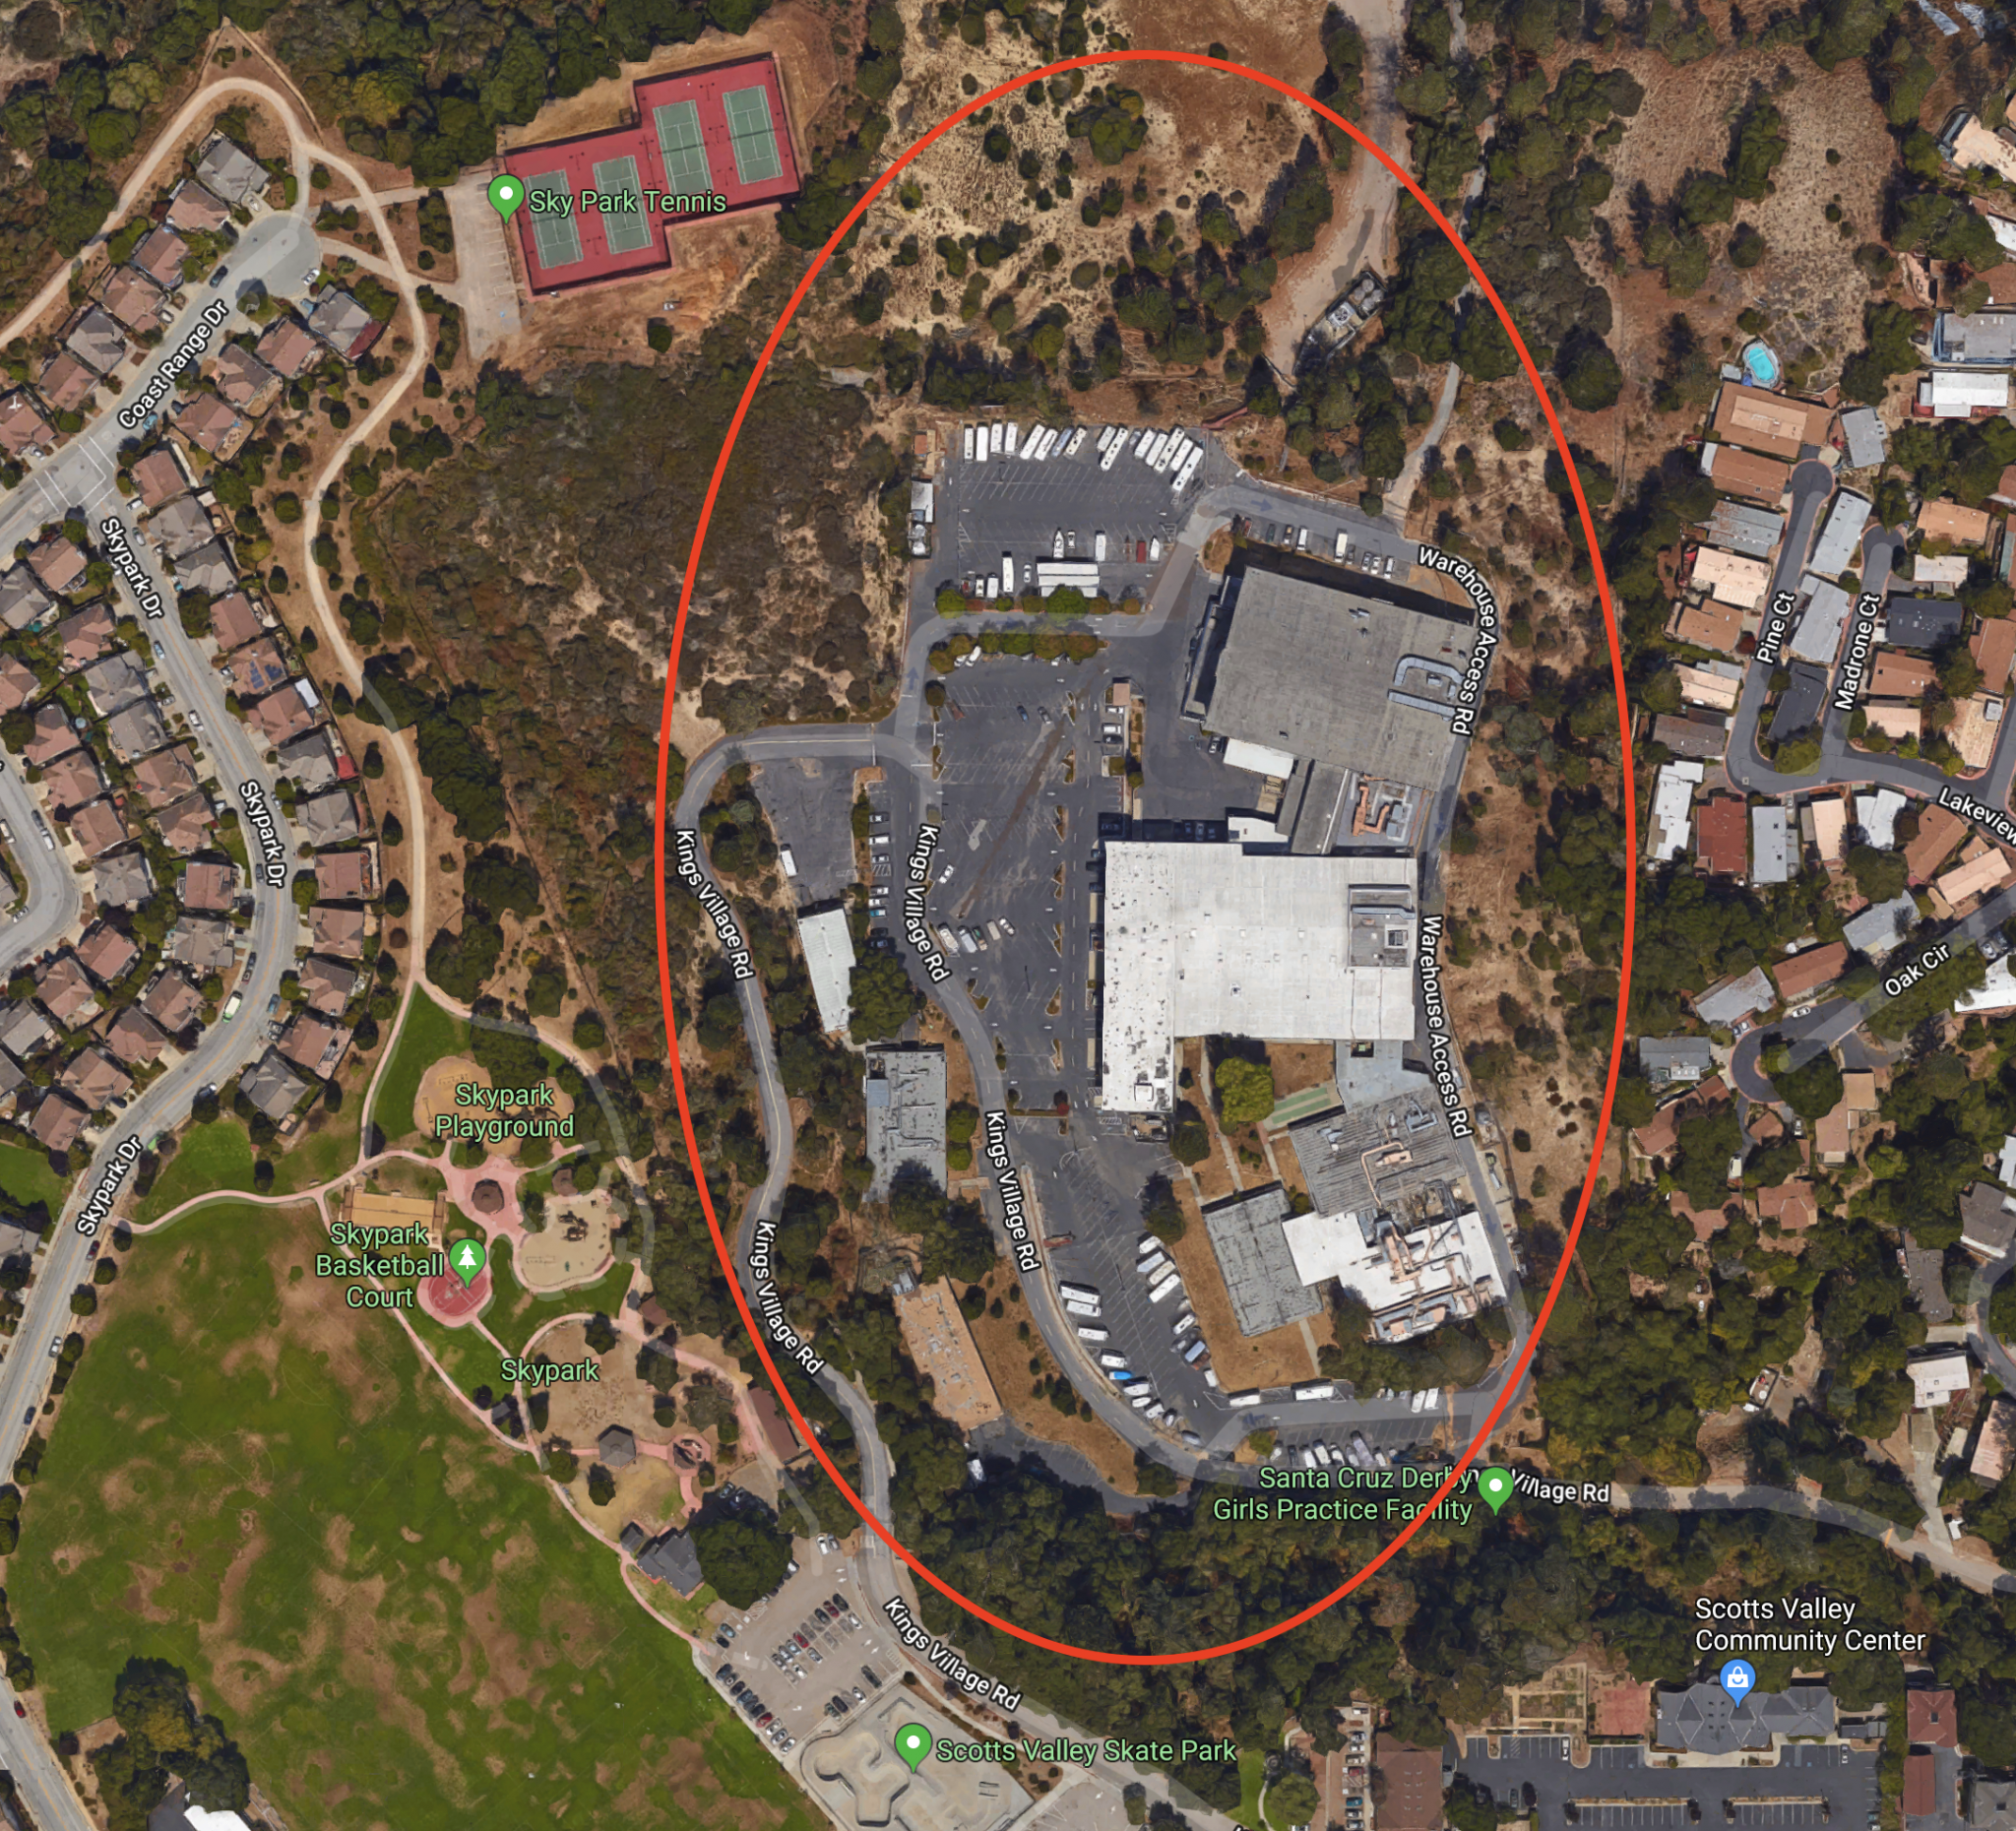 Scotts Valley Planning Commission to Look at AVIZA Property Home Development Project